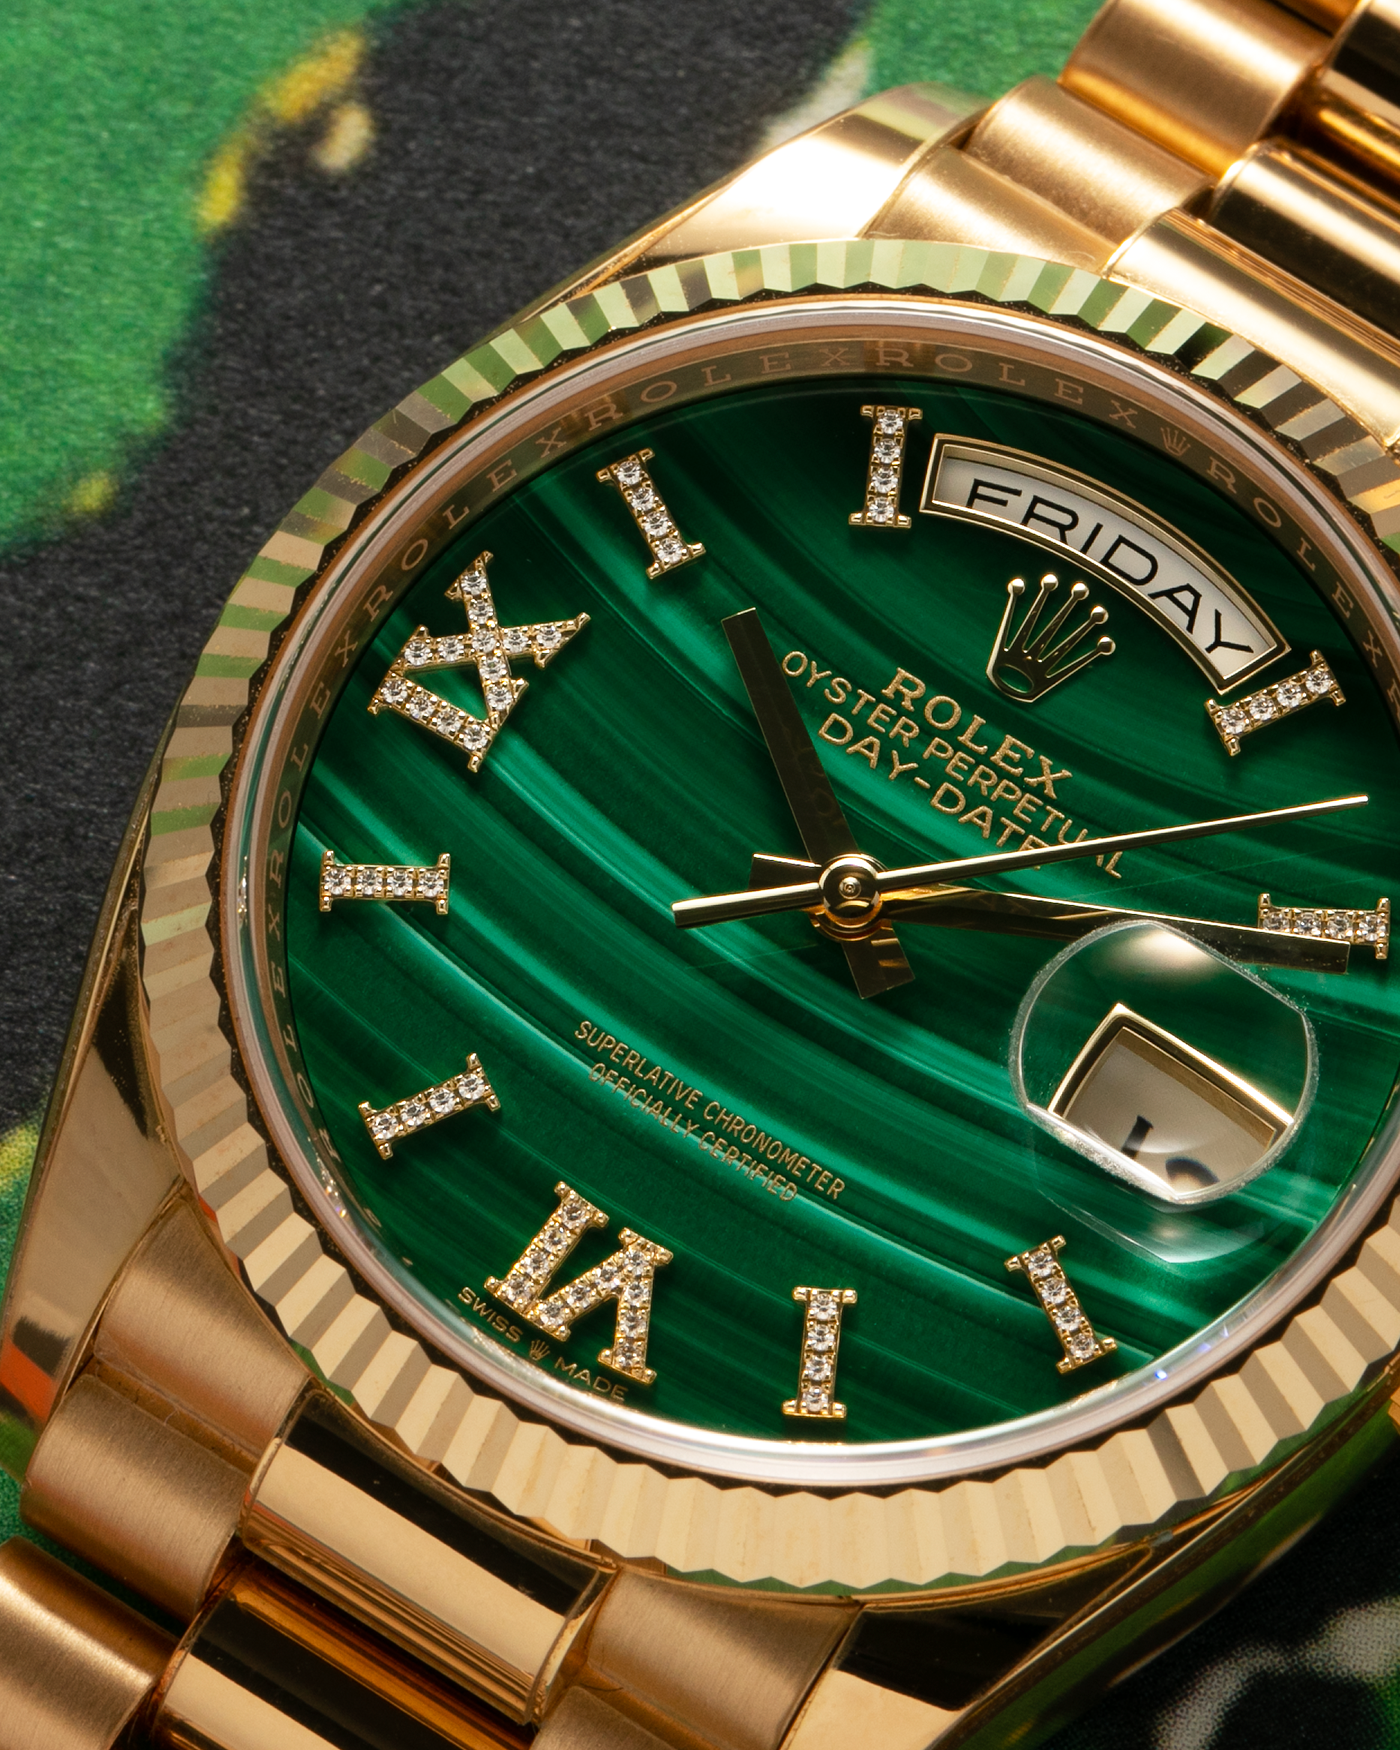 Brand: Rolex Year: 2021 Model: Day-Date 36 ‘Malachite Diamond’ Reference Number: 128238 Serial Number: 6H47XXXX Material: 18-carat Yellow Gold Case, Green Malachite Dial, Factory Set Diamond Roman-Style Hour Markers Movement: Rolex Cal. 3255, Self-Winding Case Diameter: 36mm Bracelet: Rolex Presidential Bracelet in 18-carat Yellow Gold